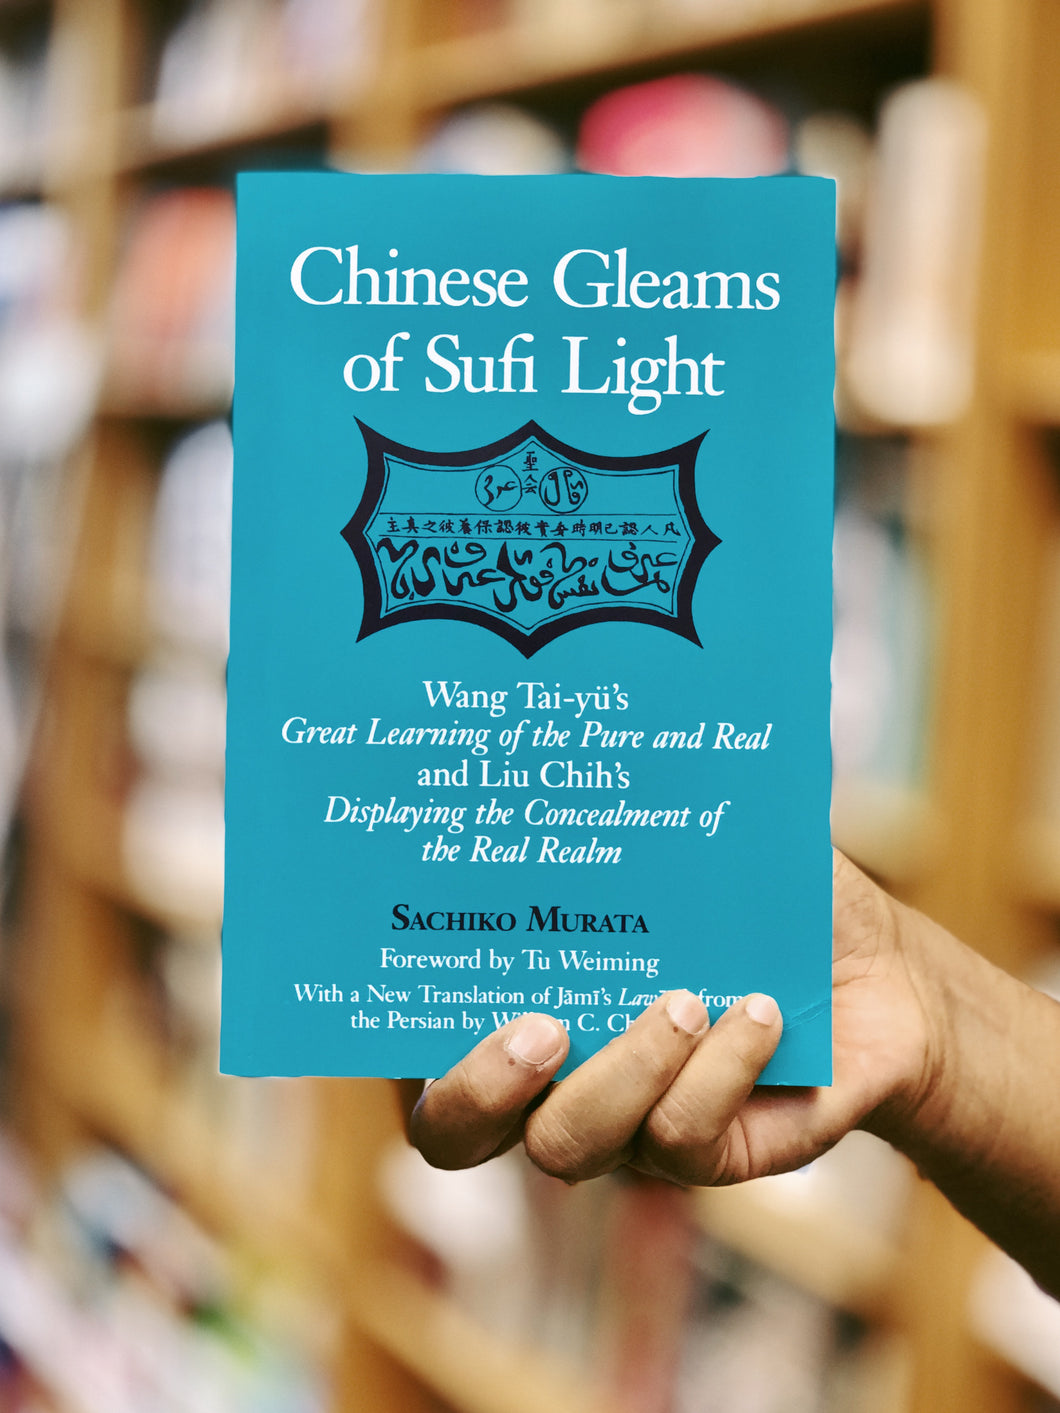 Chinese Gleams of Sufi Light: Wang Tai-yu's Great Learning of the Pure and Real and Liu Chih's Displaying the Concealment of the Real Realm